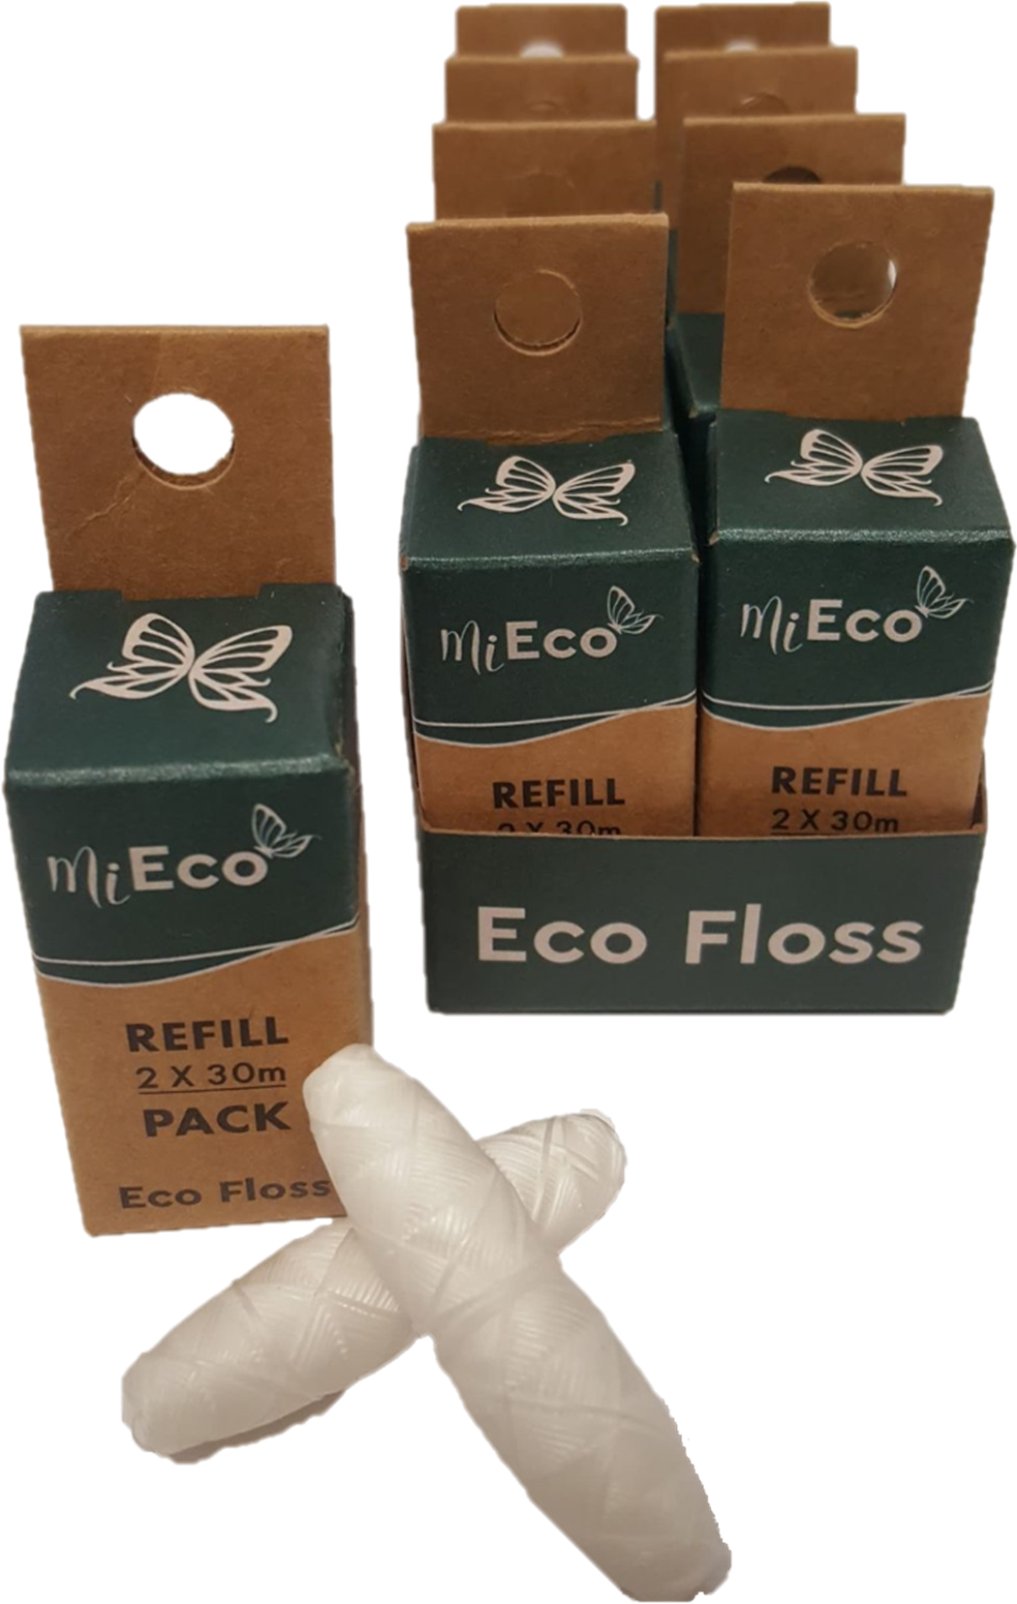 Dental Floss - Refill Compostable - Eco PatchDental